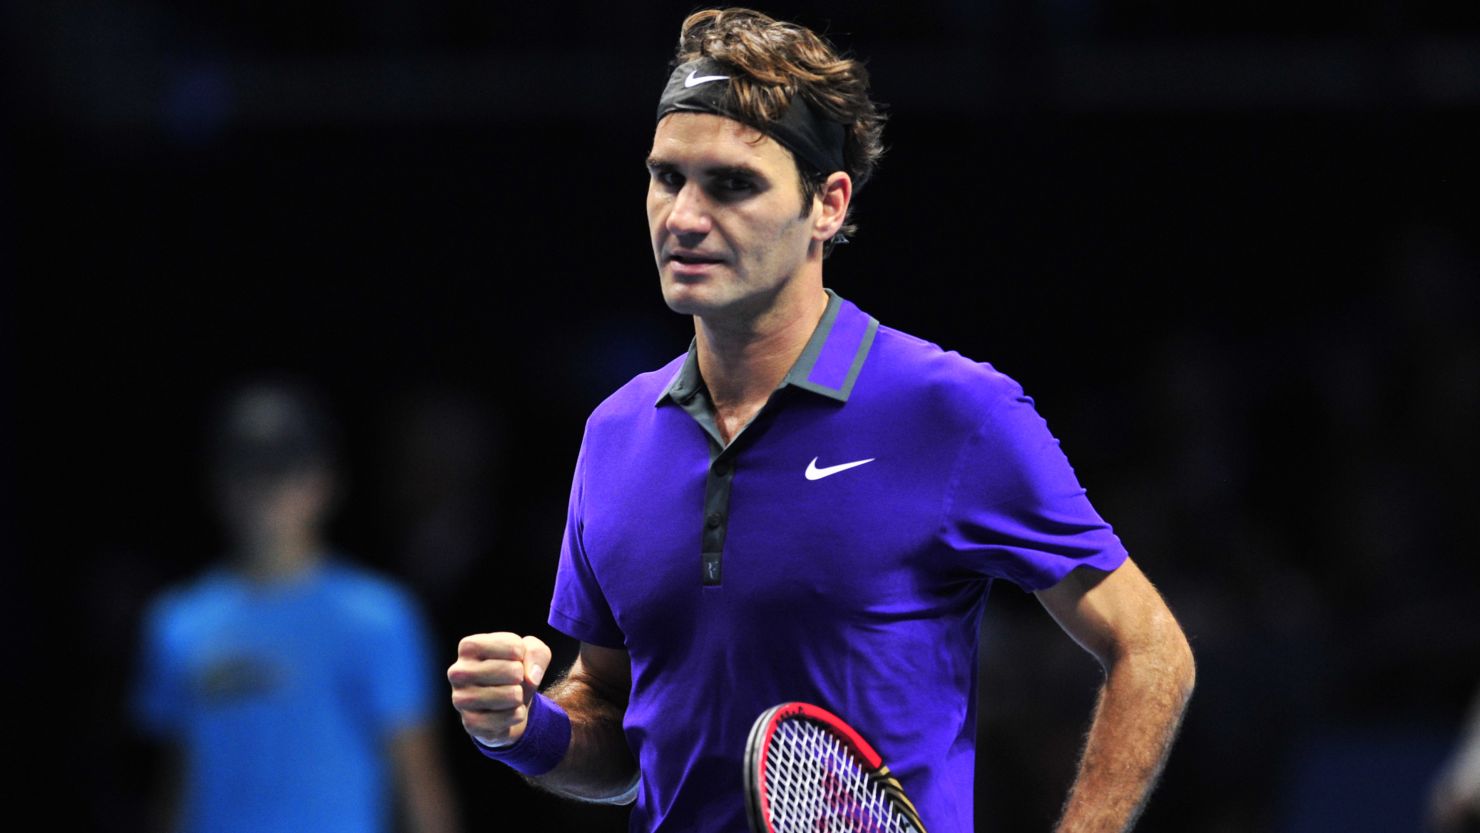 Roger Federer needed just 68 minutes to demolish Serbia's Janko Tipsarevic at the ATP World Tour Finals.